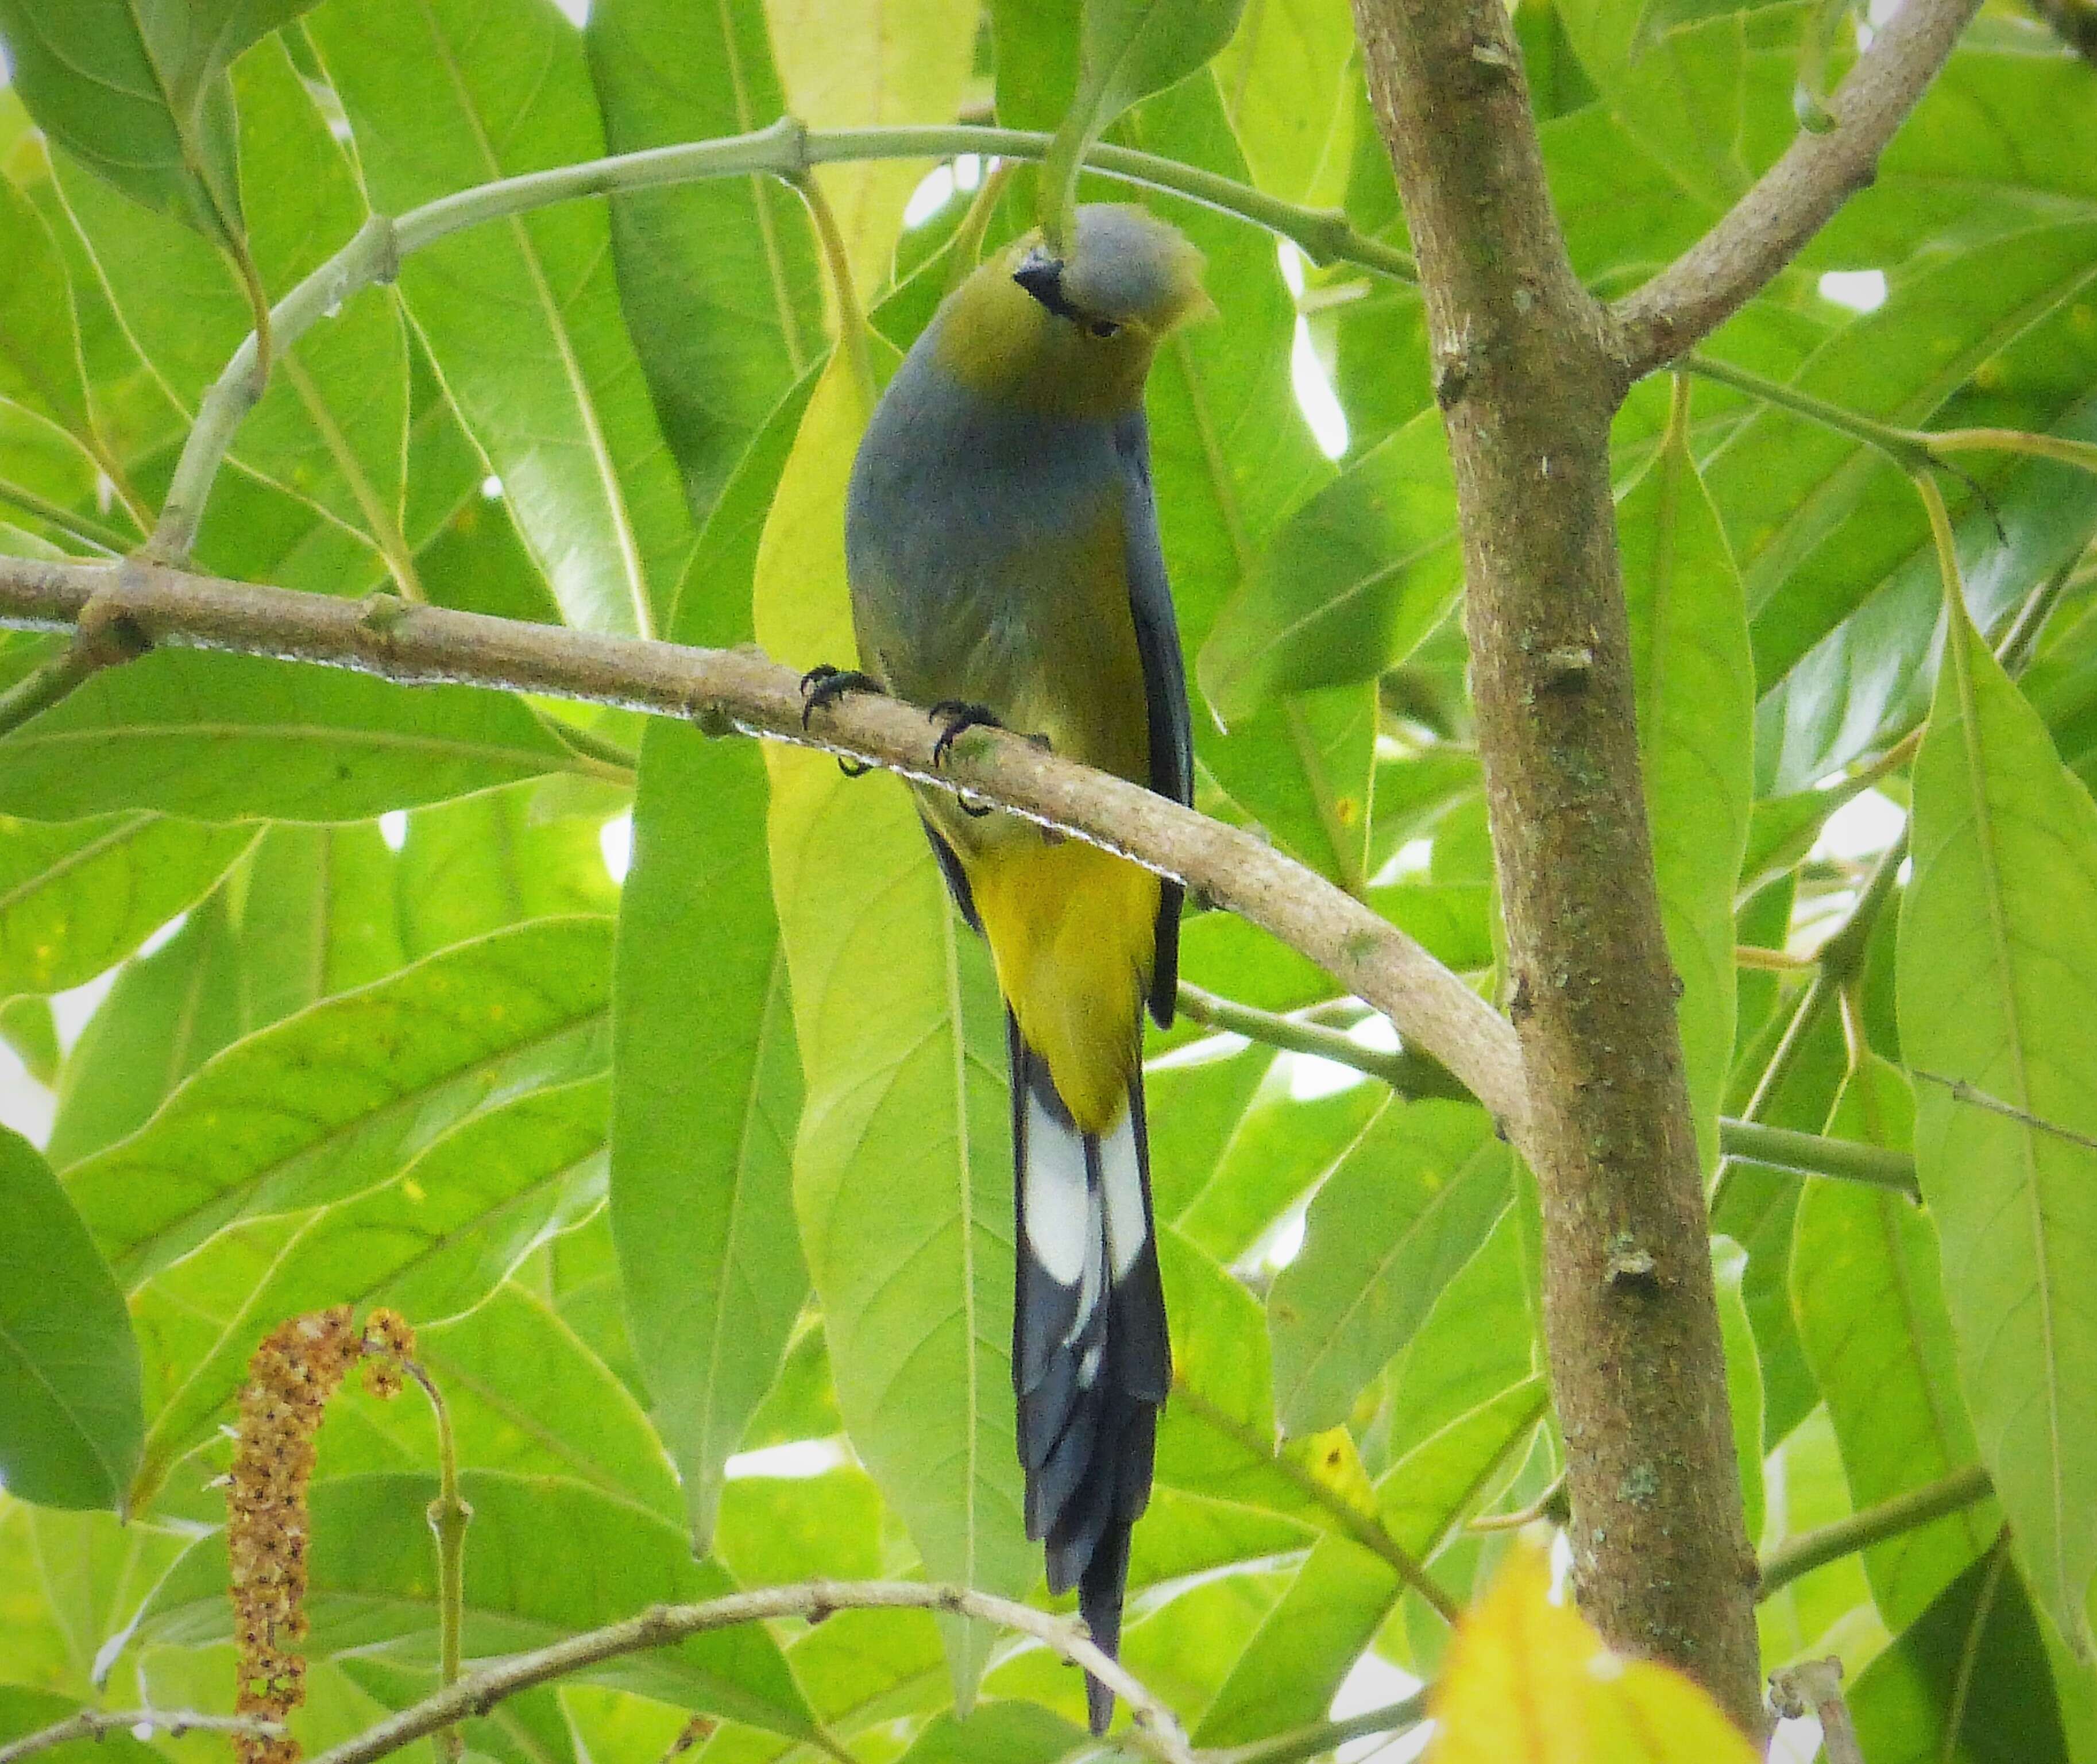 Image of Long-tailed Silky-flycatcher